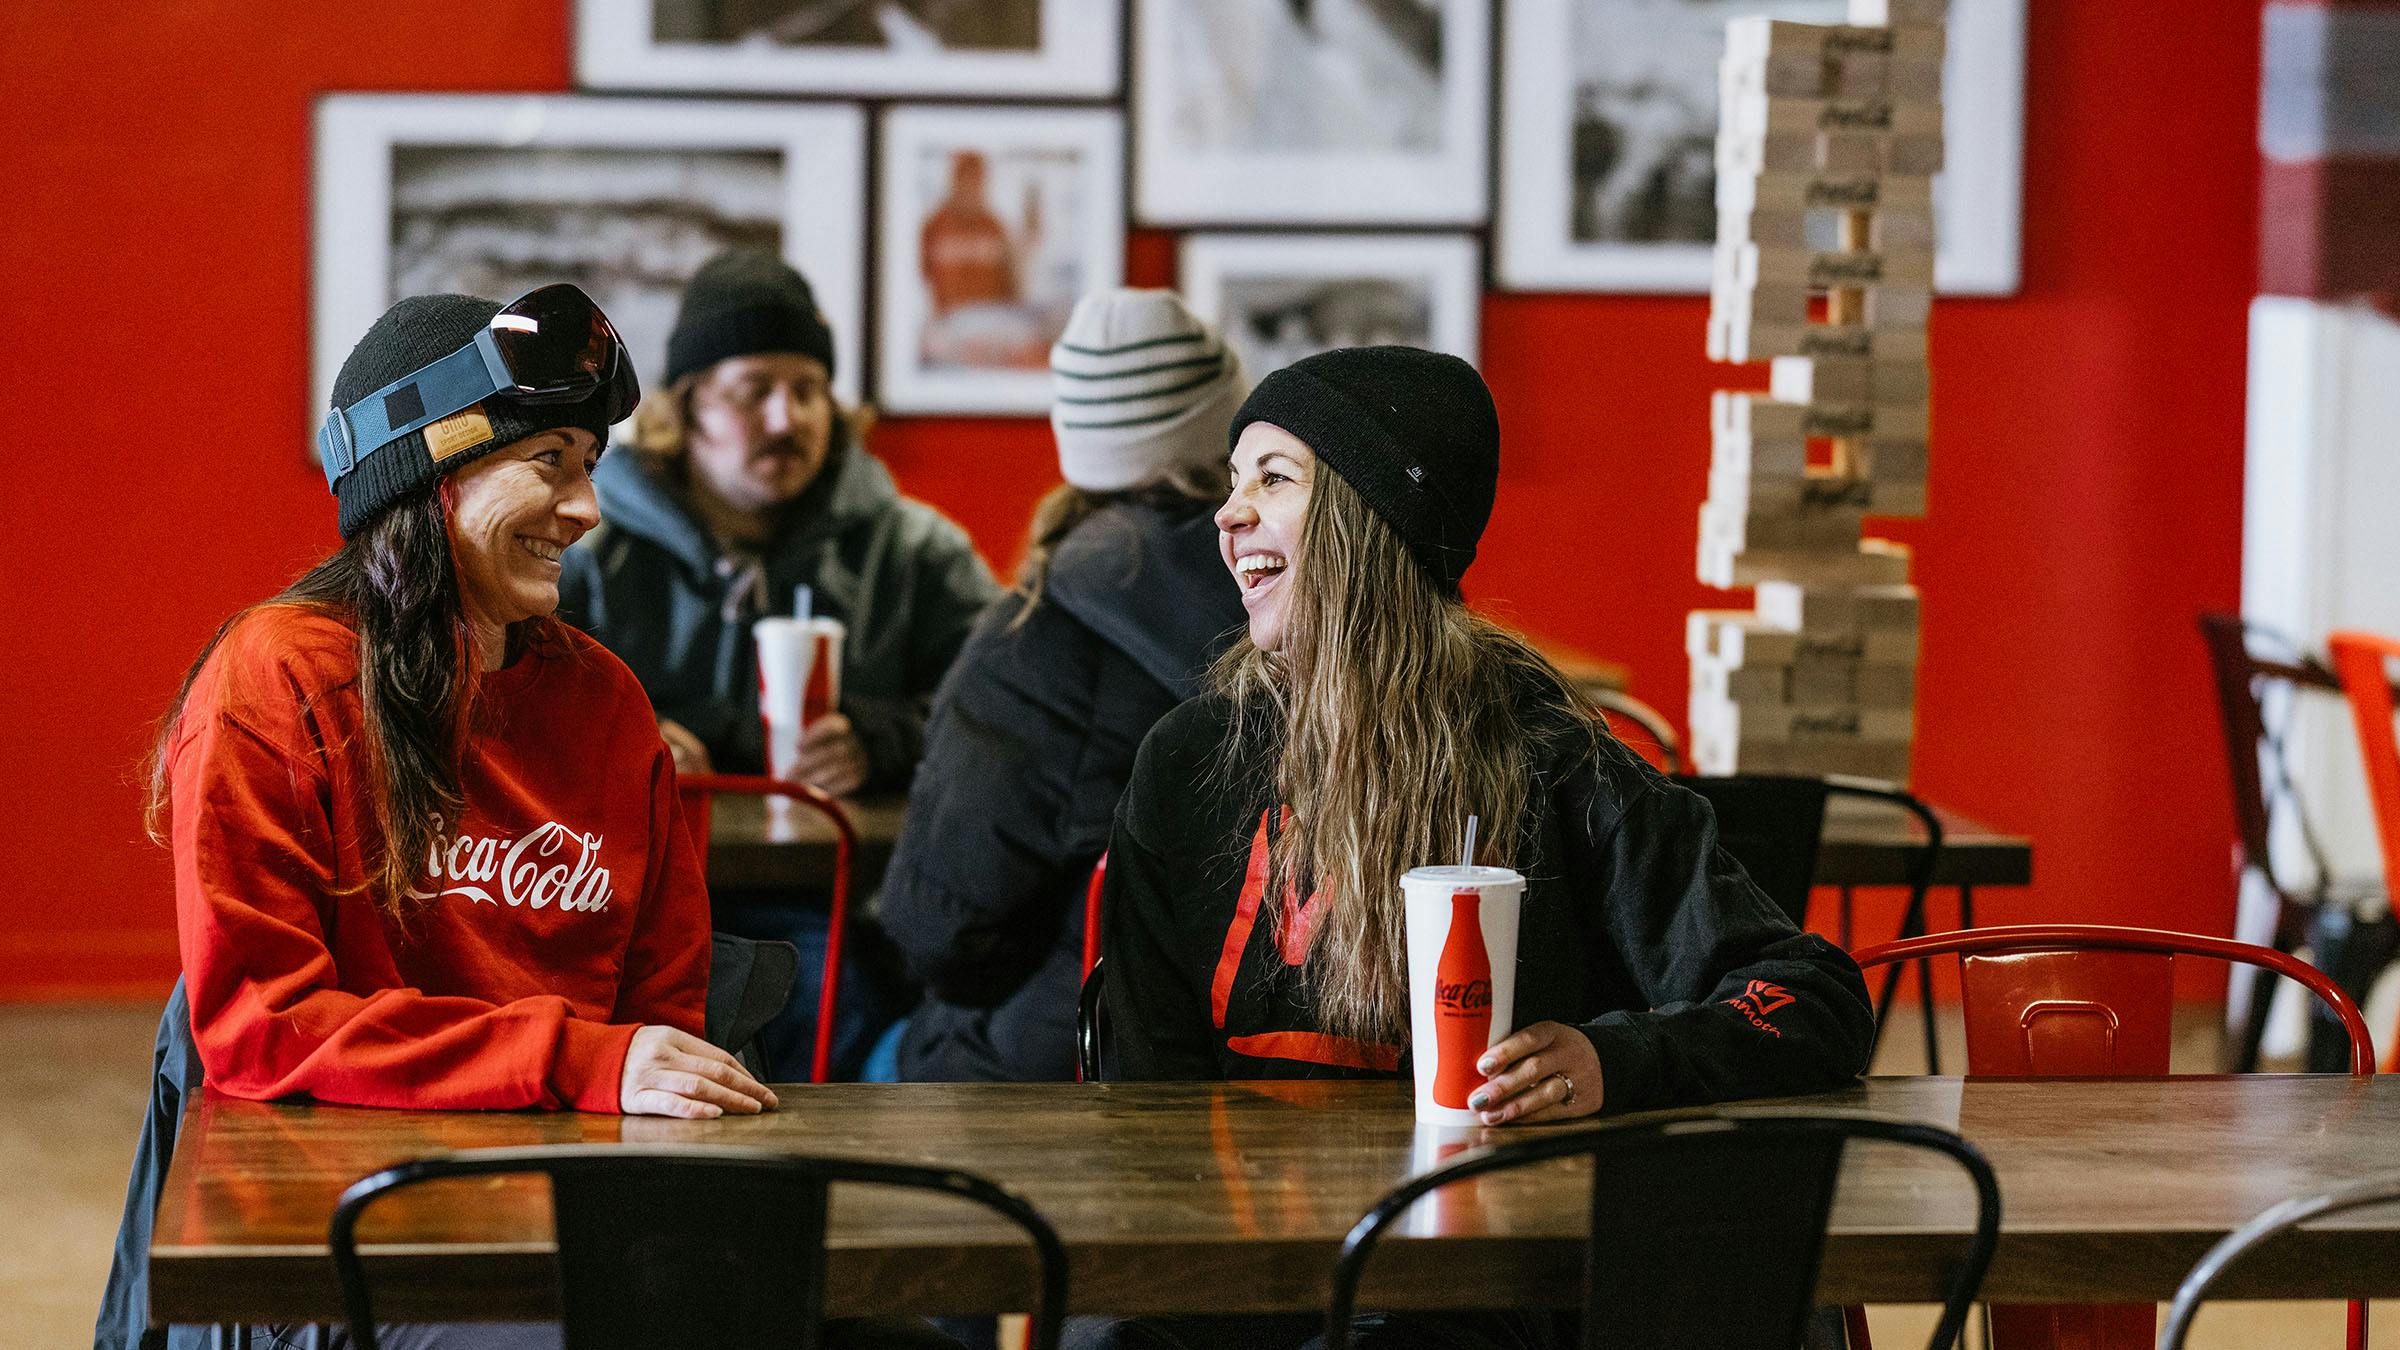 Two friends seated at table drinking Coca-Cola 